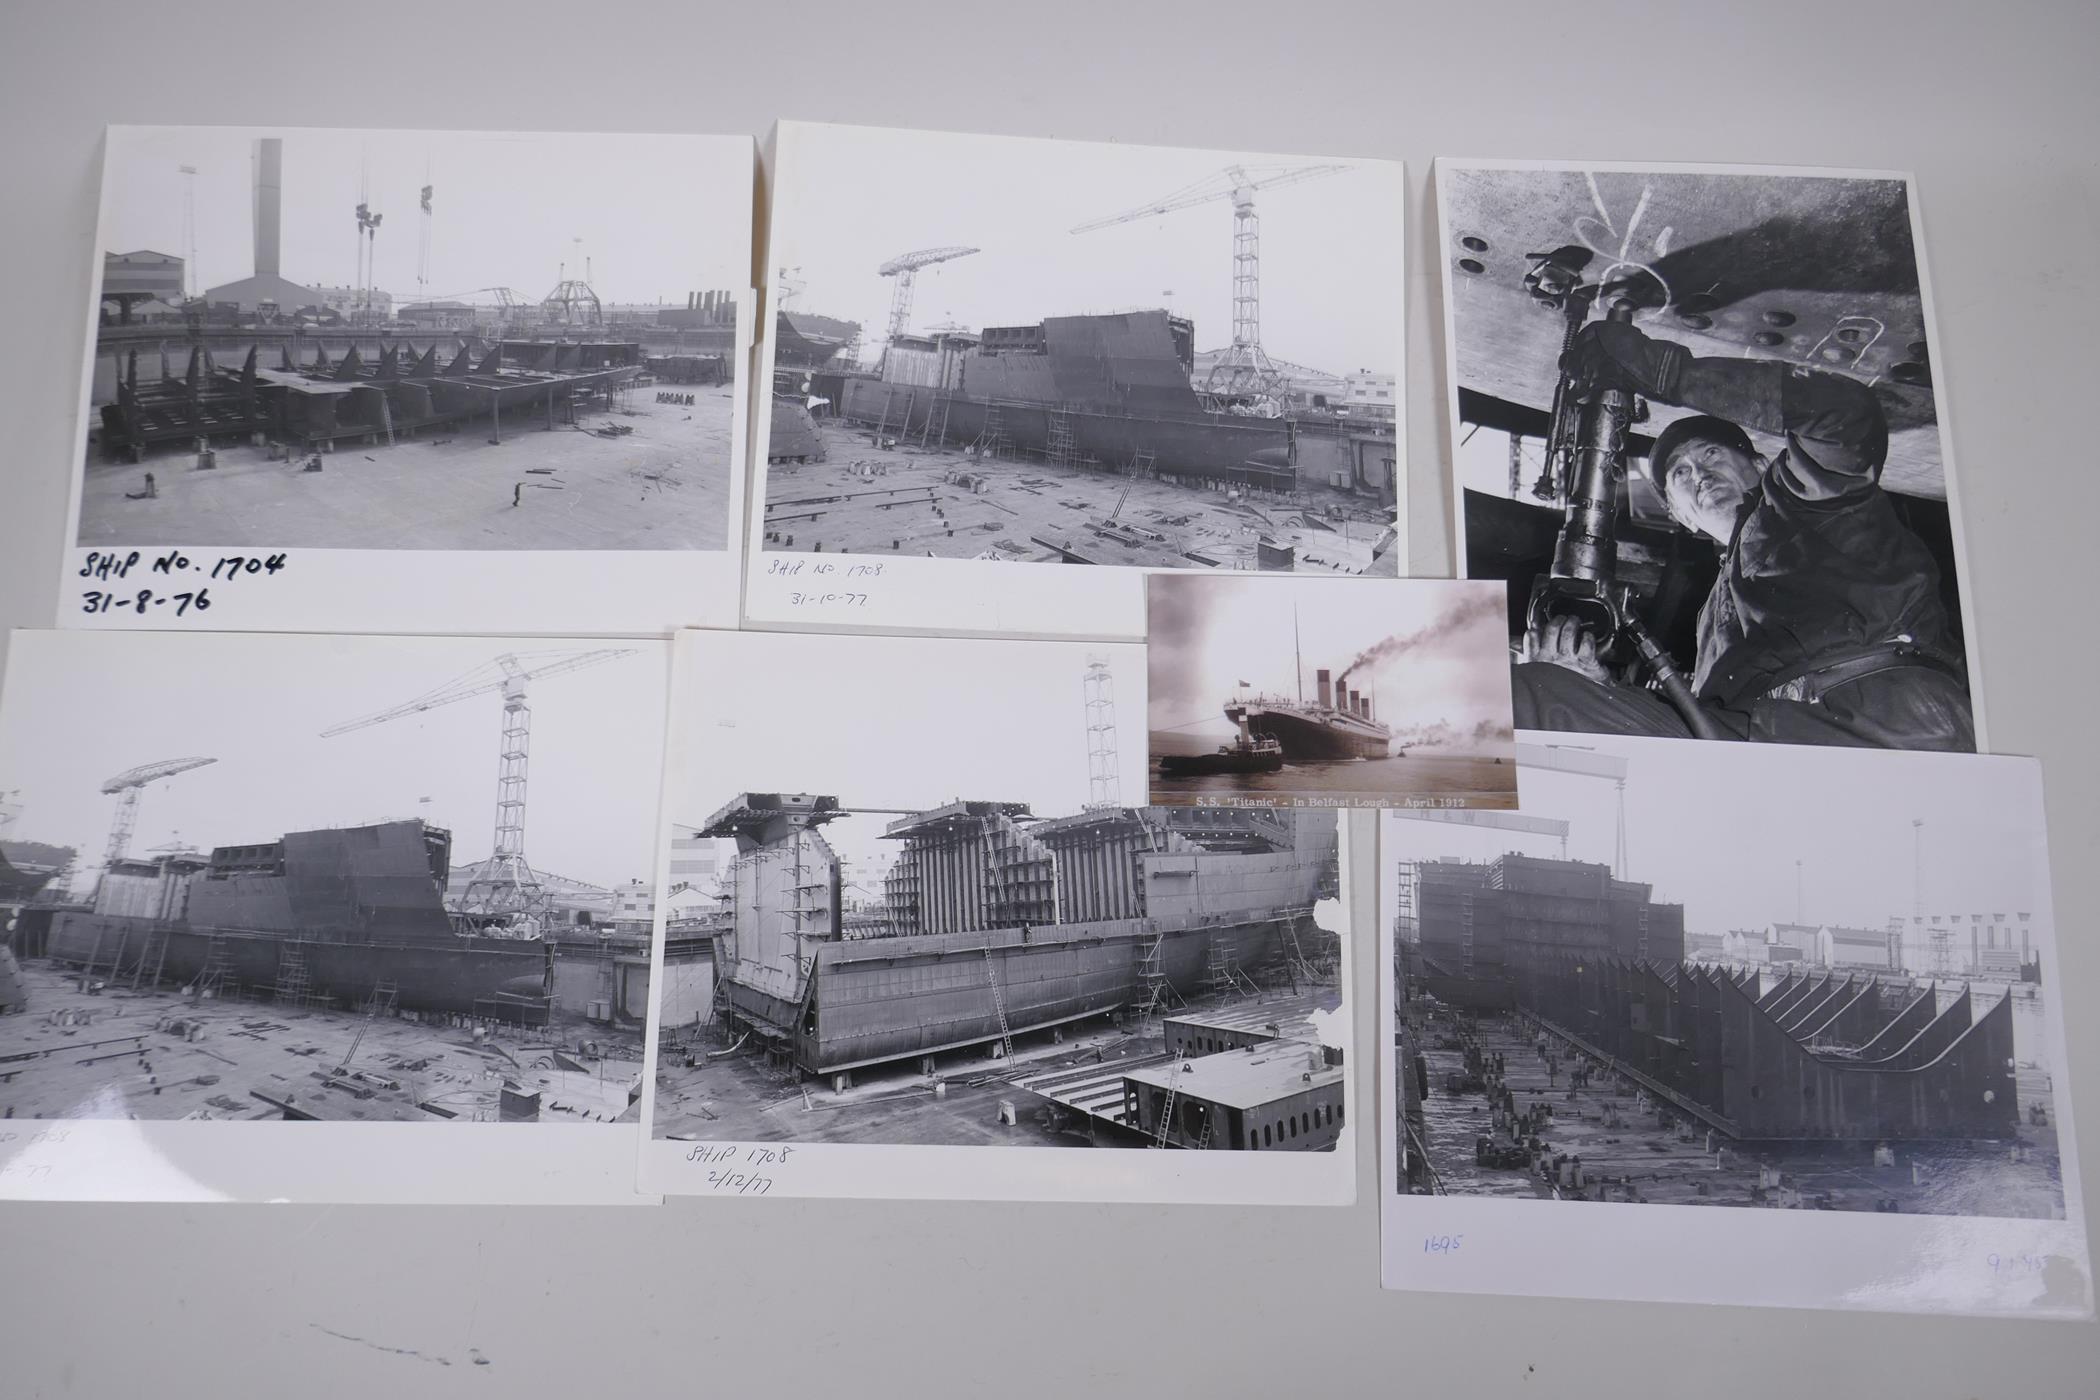 A collection of photographs of the Harland and Wolff Shipyard Belfast taken during the building of